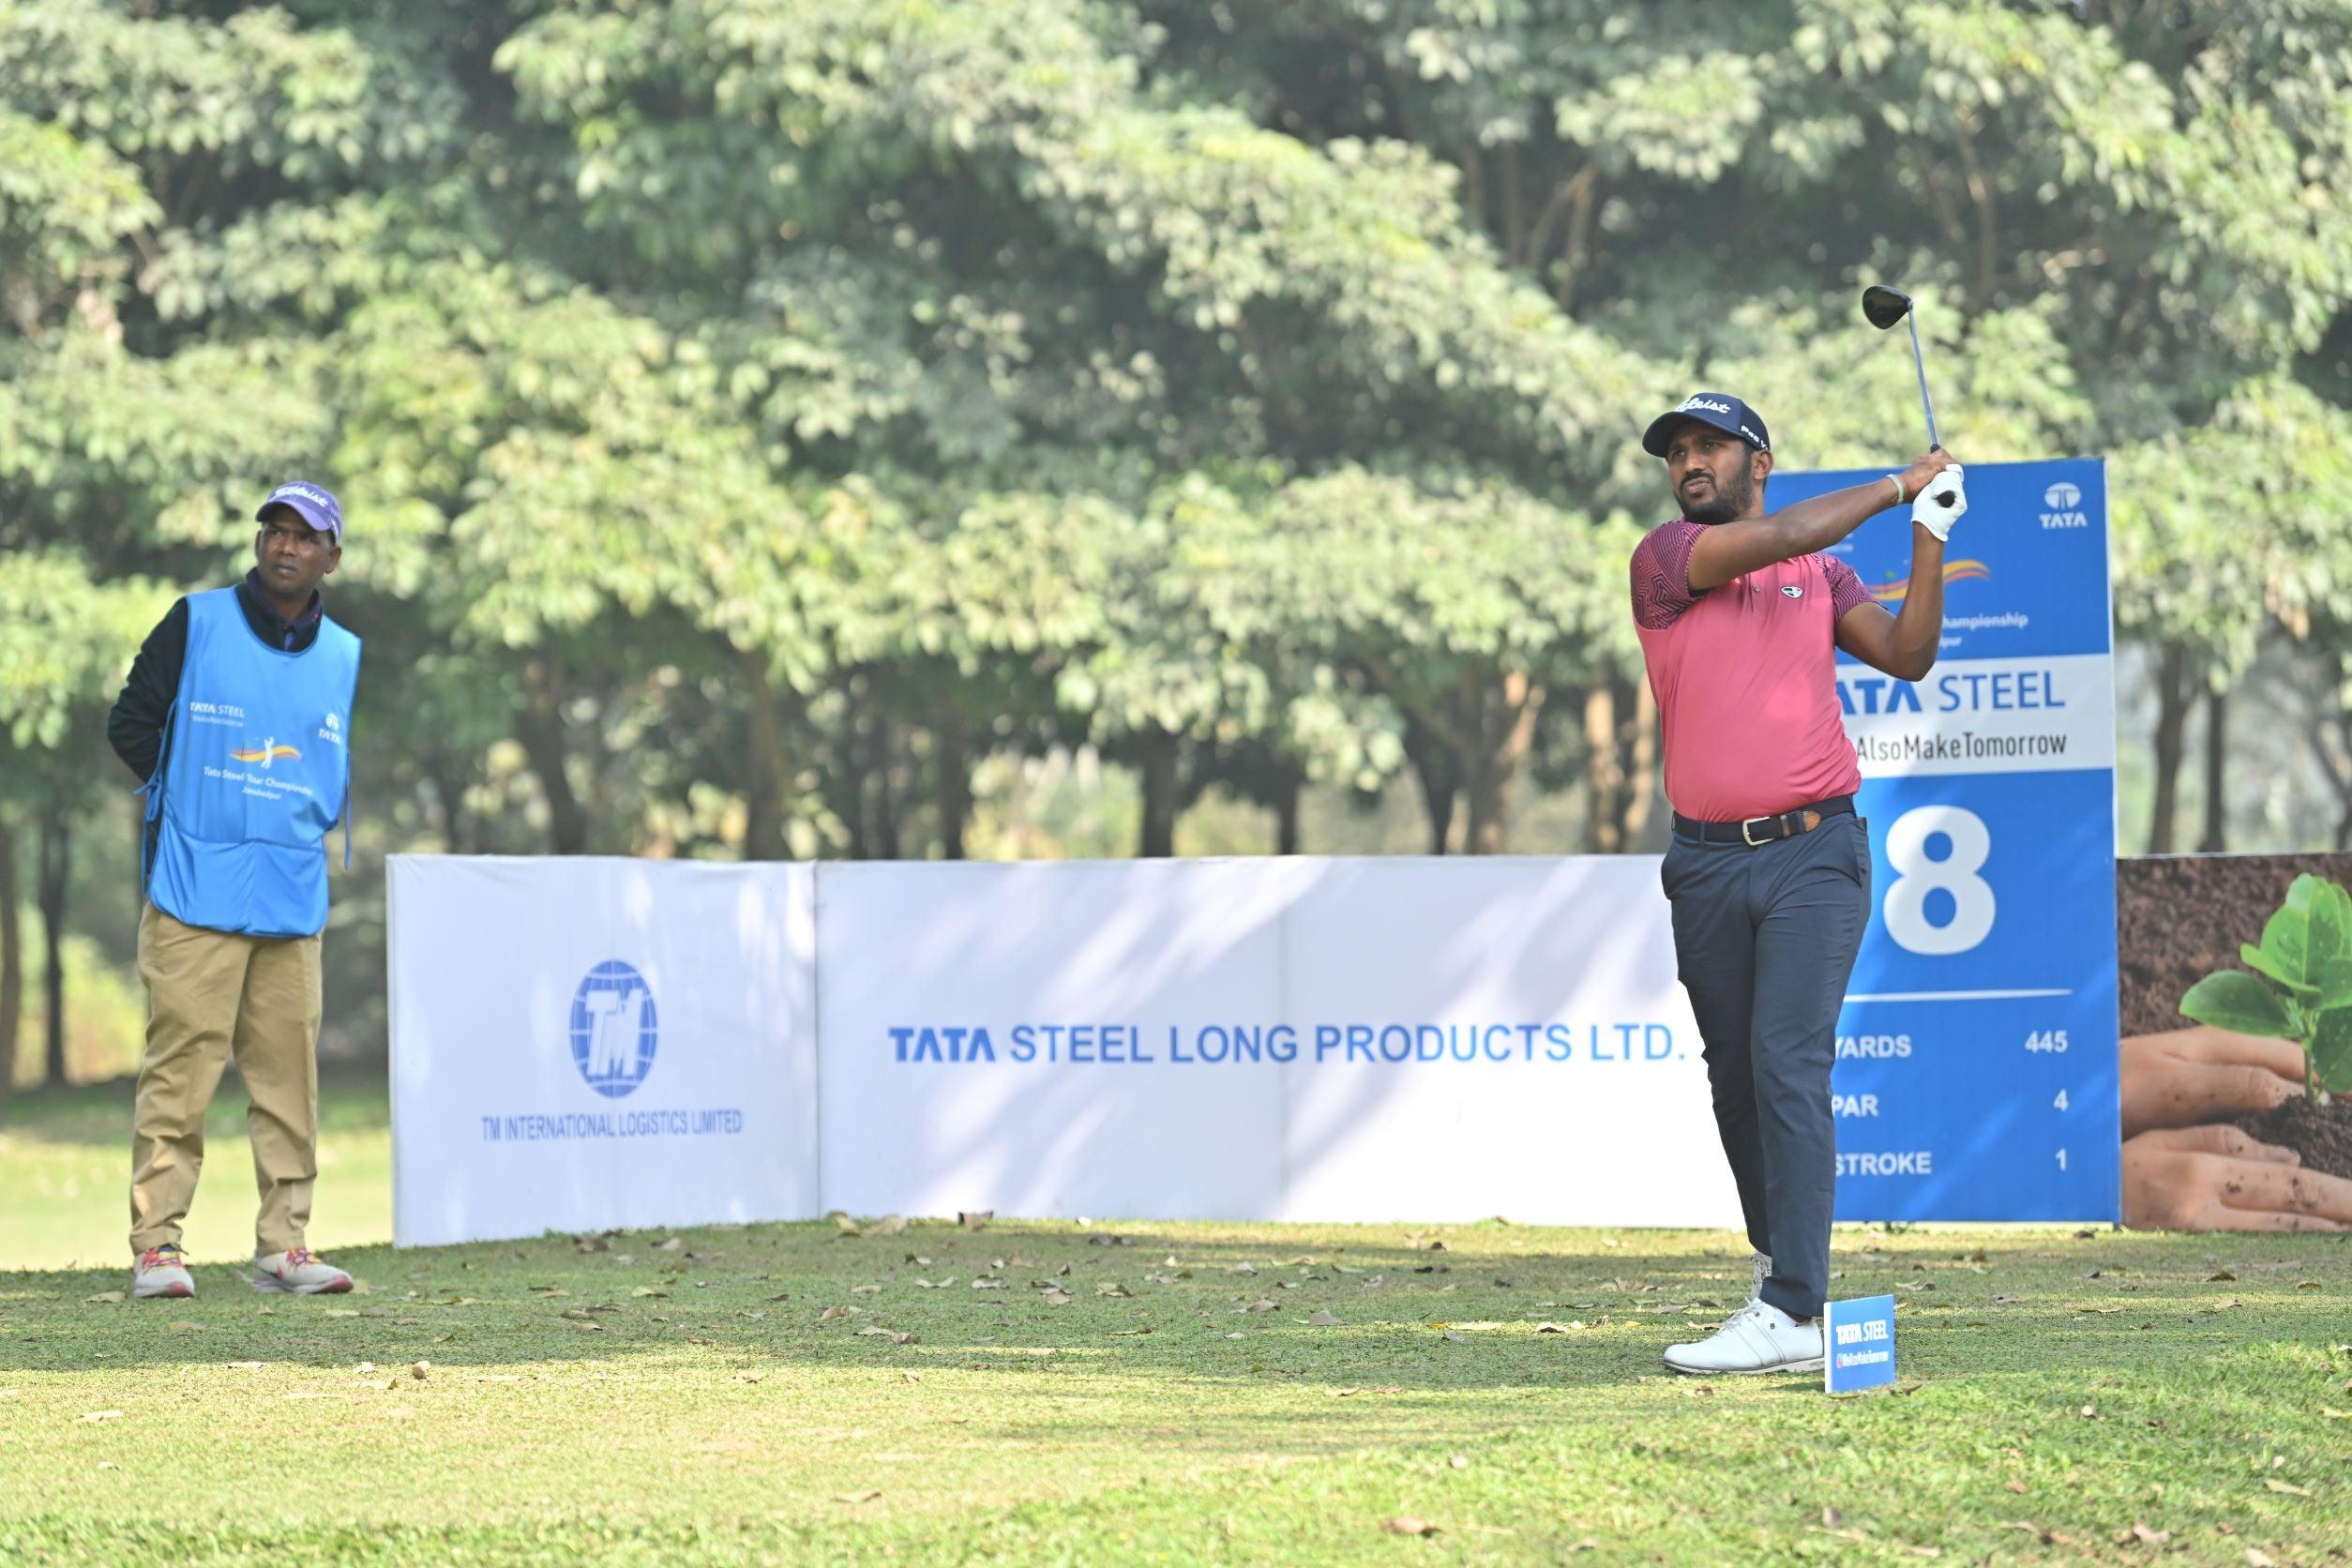 Chikkarangappa storms into the third round lead with sublime 62 at TATA Steel Tour Championship 2022 In India | golfedge  | India’s Favourite Online Golf Store  | golfedgeindia.com